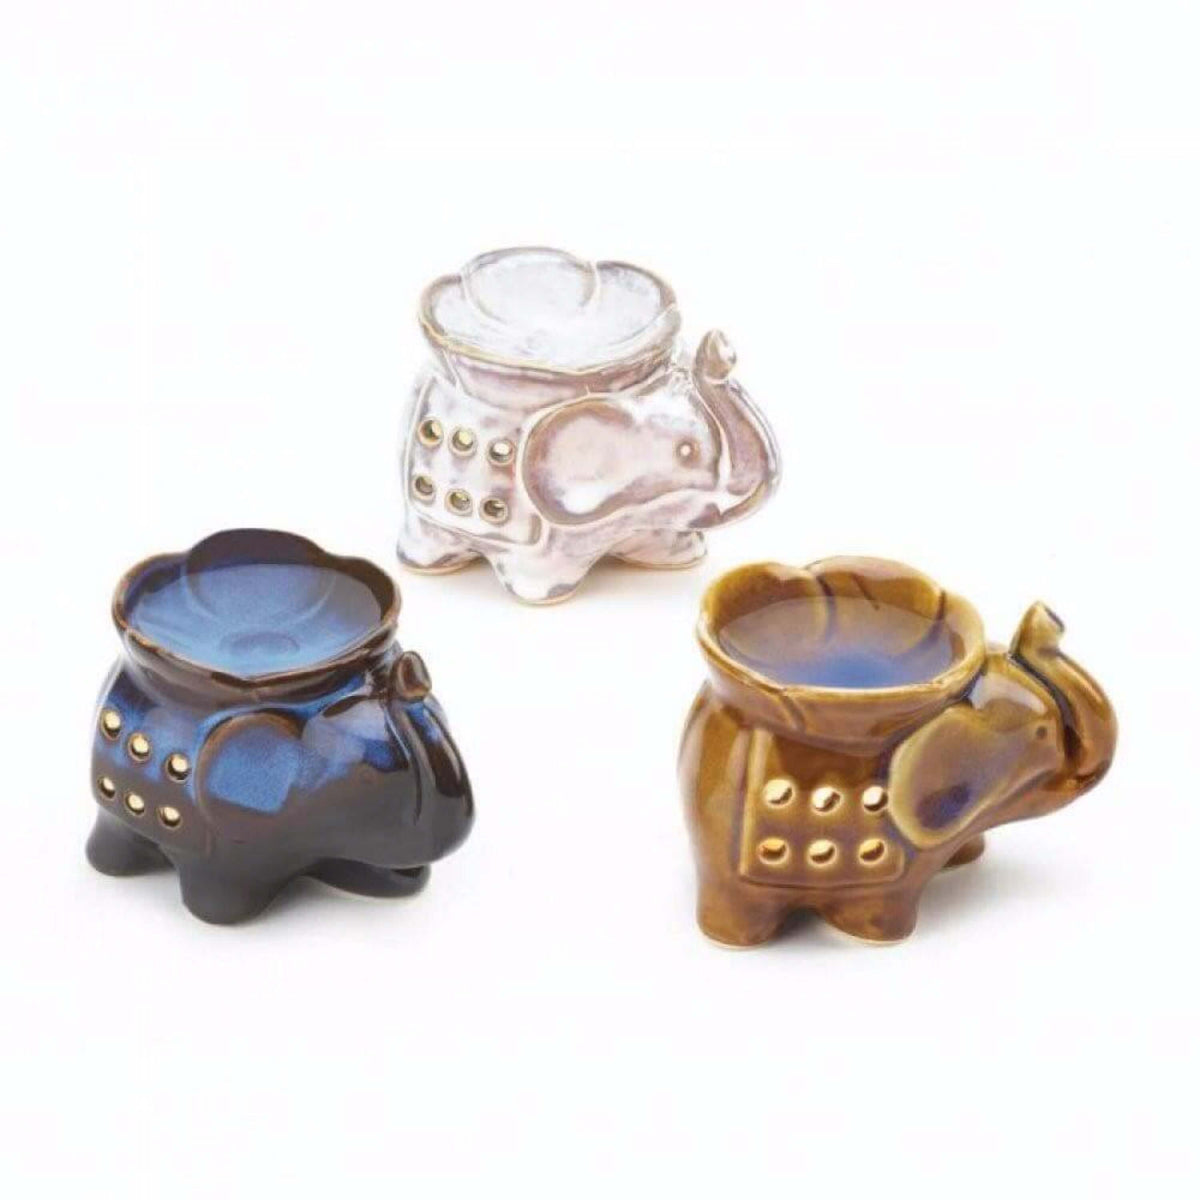 Elephant Oil Warmer Trio with 3 Tea Lights and Choice of Oil - The House of Awareness